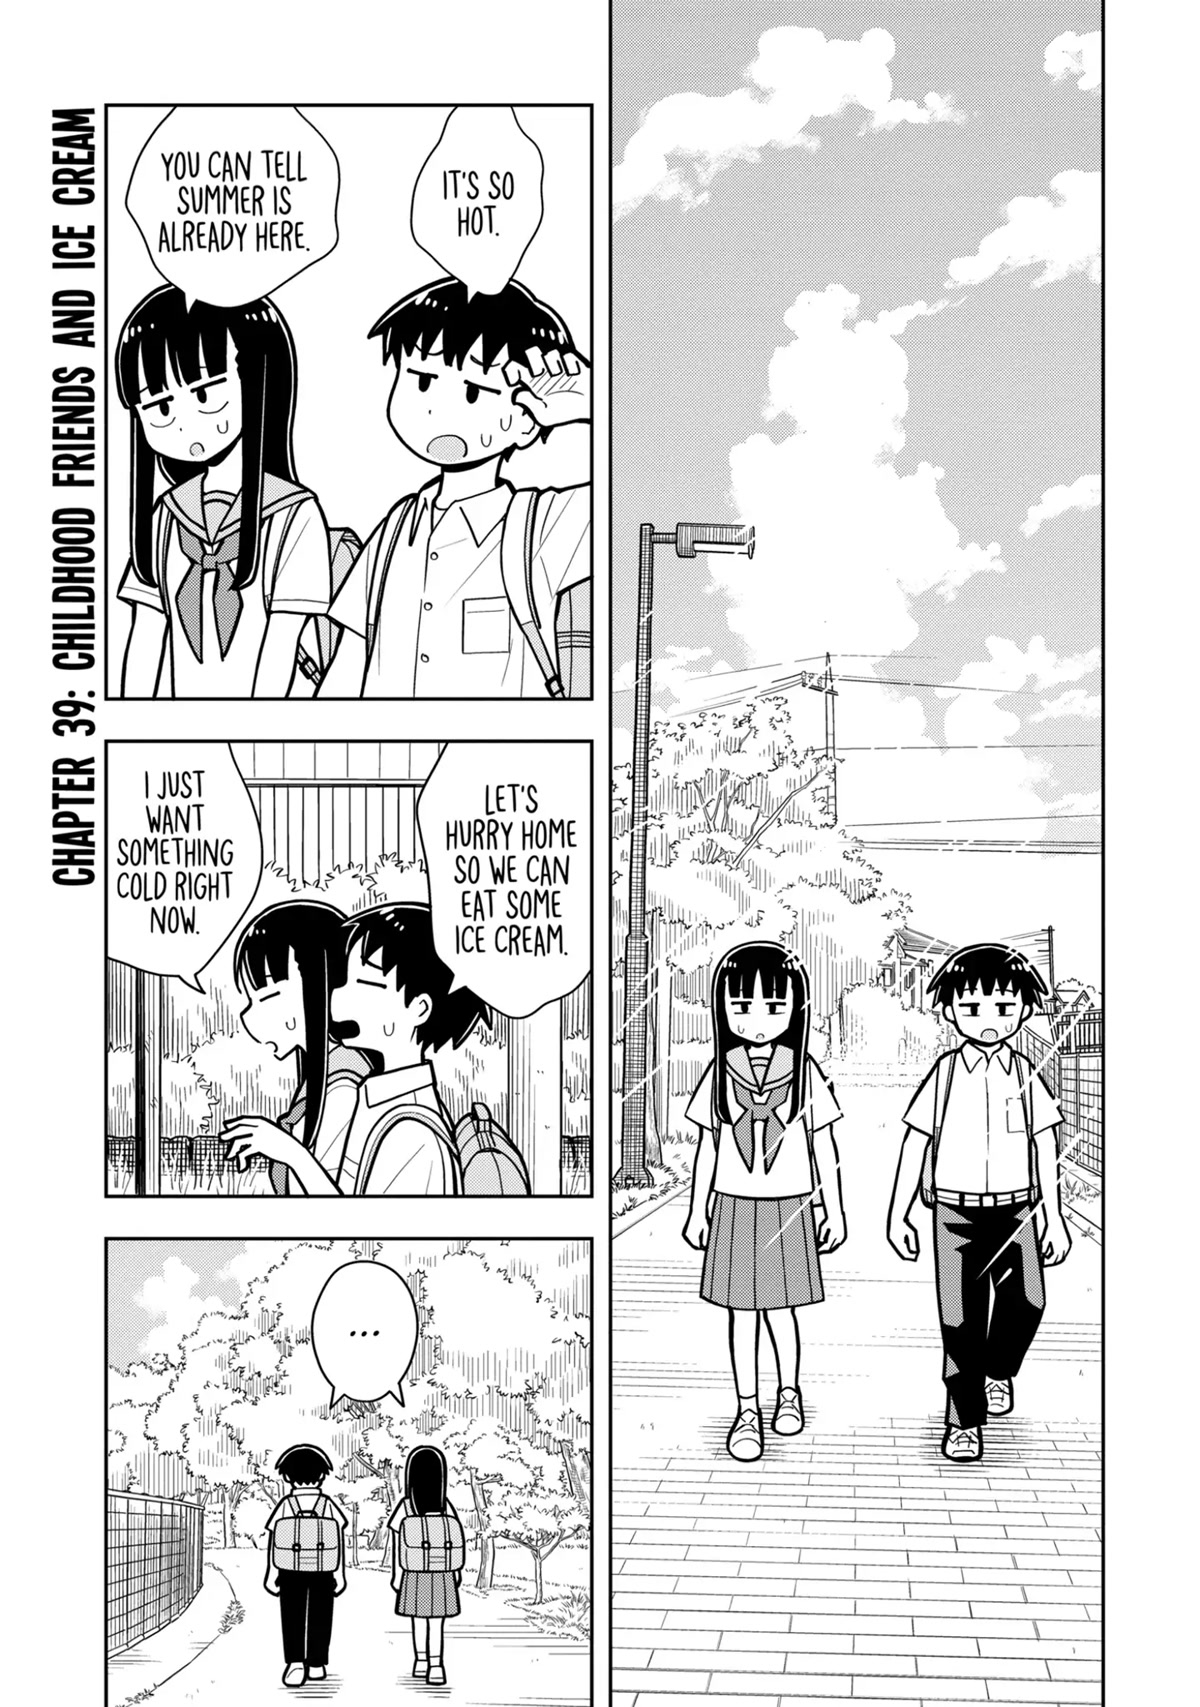 Starting Today She's My Childhood Friend - Page 1